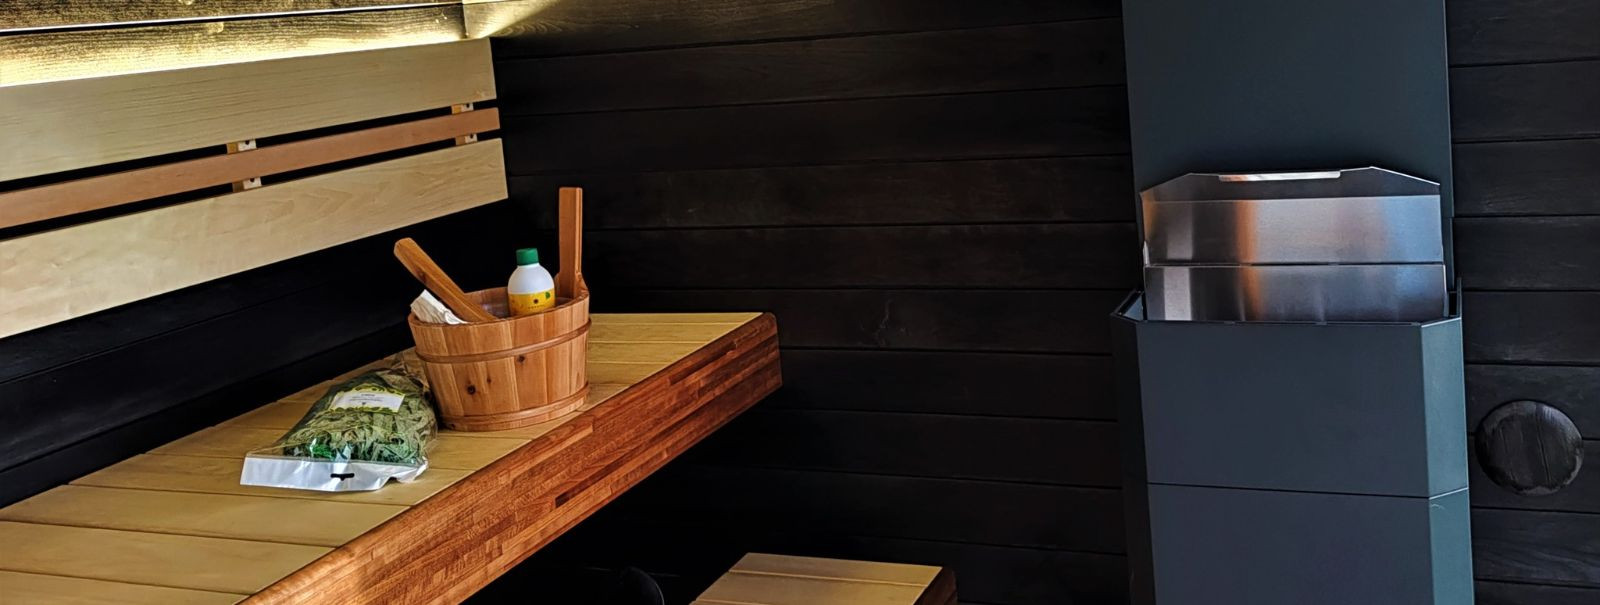 Creating the right ambiance in a sauna is about more than just temperature and humidity. It's about invoking a sense of tranquility and emotional well-being. Th